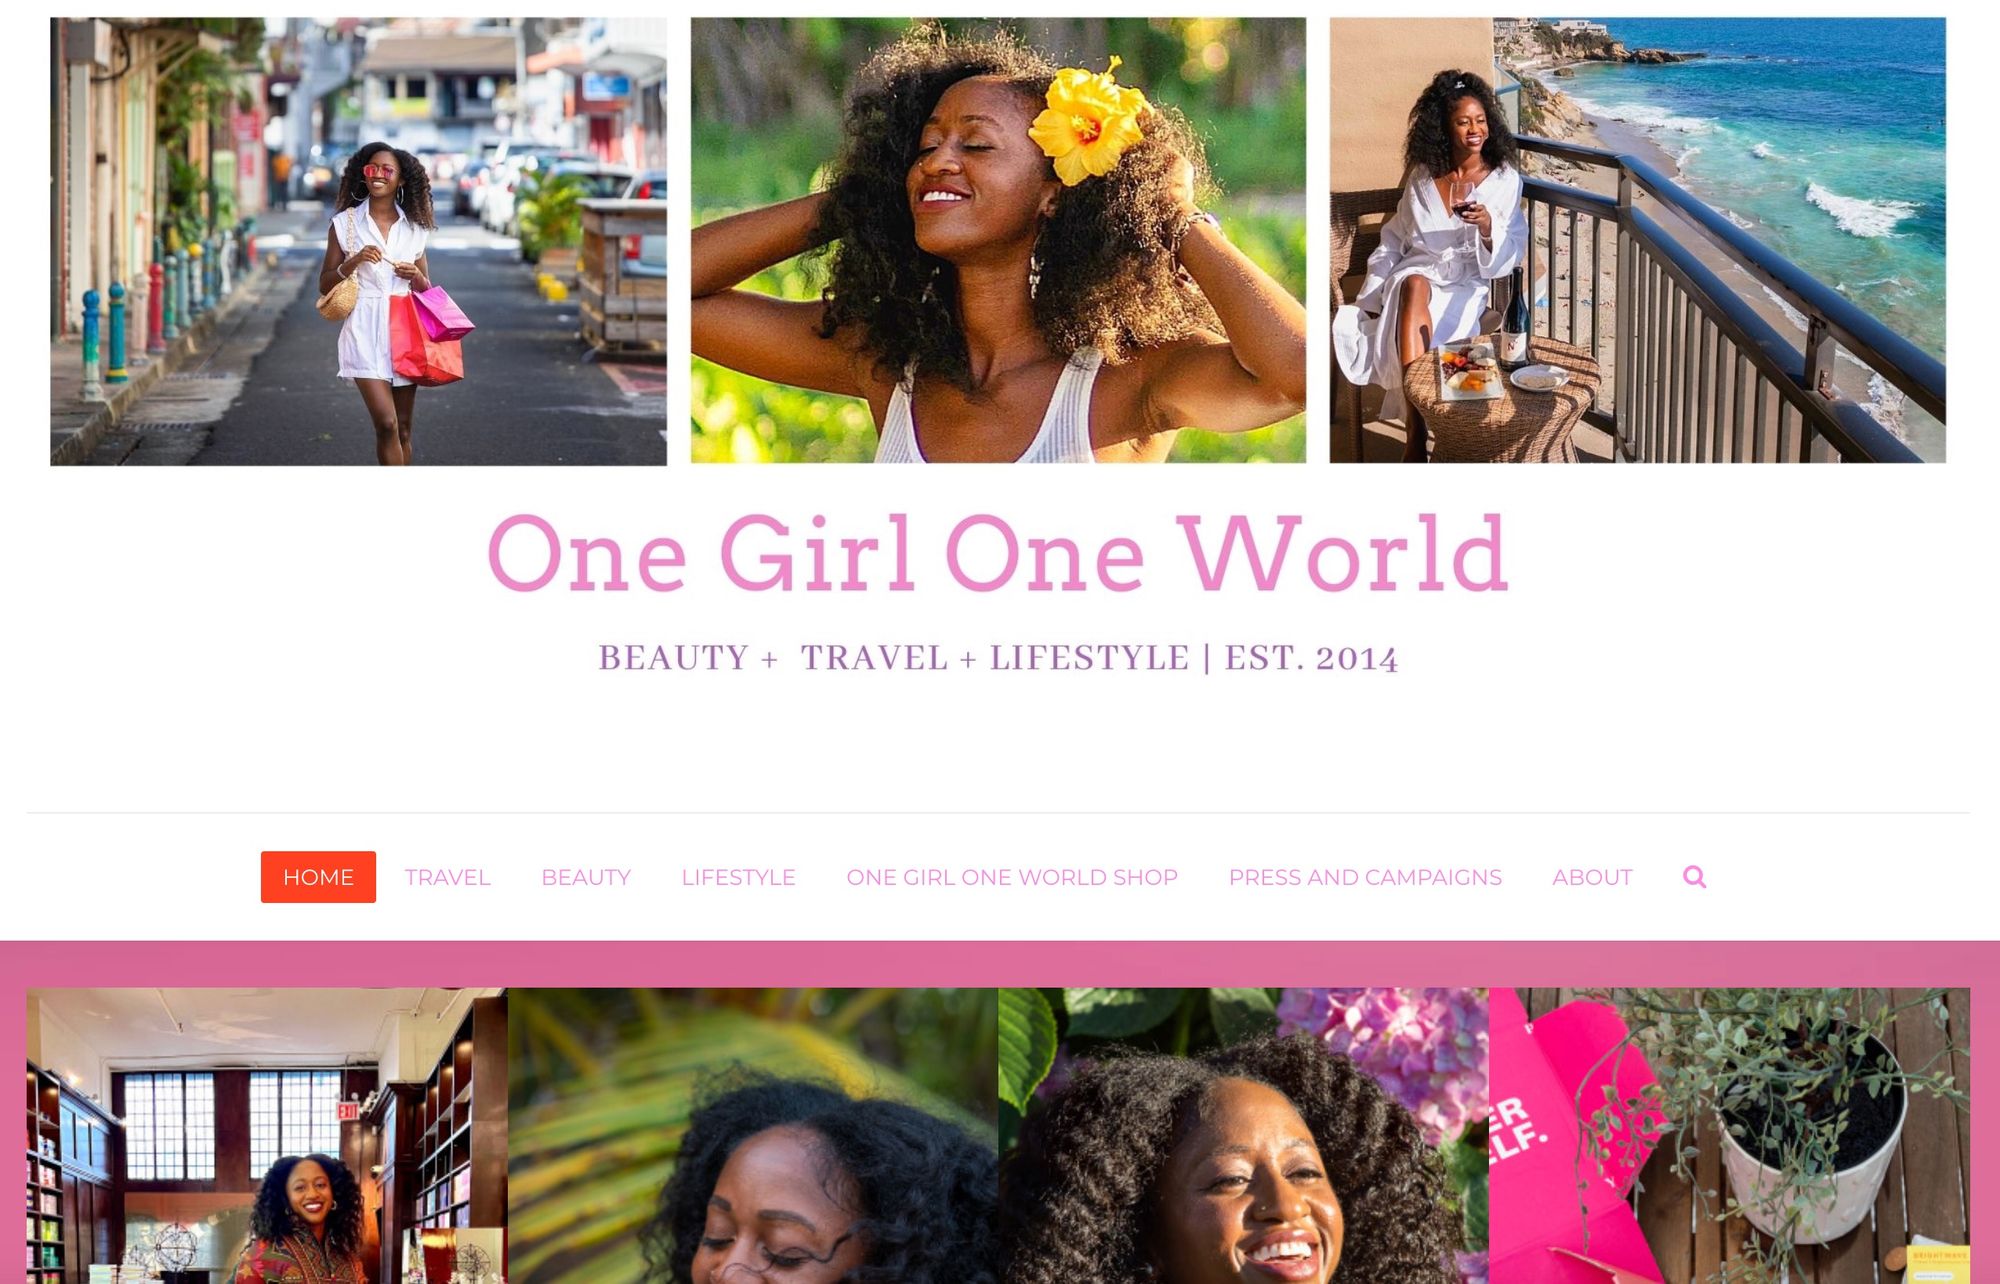 One Girl One World   Beauty    Travel    Lifestyle - The Mindset Powering This Creator’s Decade of Growth